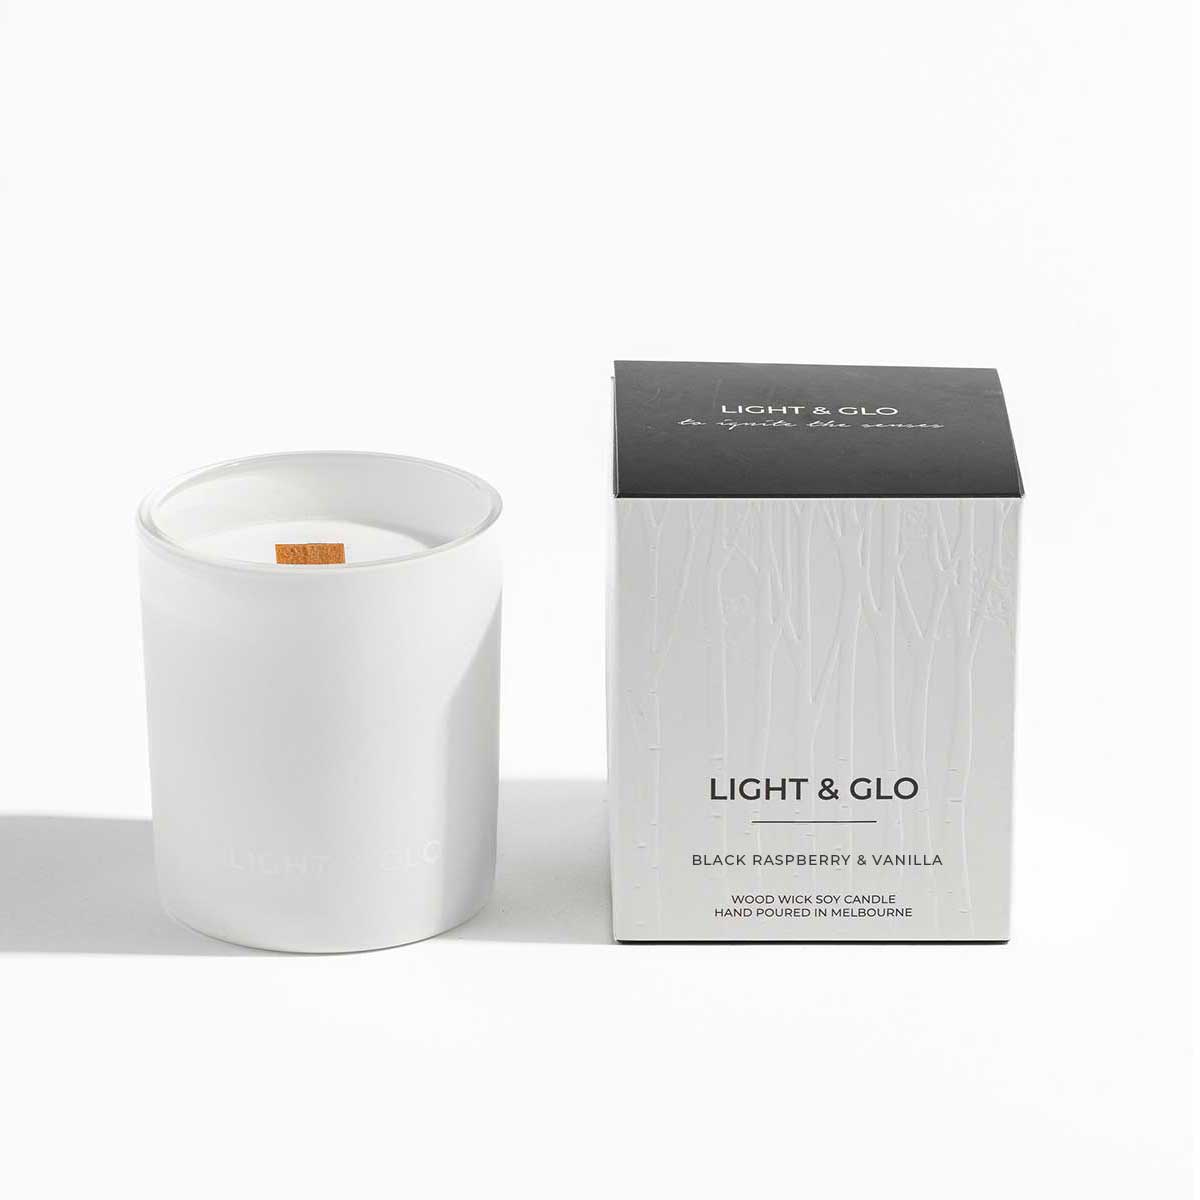 Black Raspberry & Vanilla - Monochrome Large 300g Candle | Luxury Candles & Home Fragrances by Light + Glo